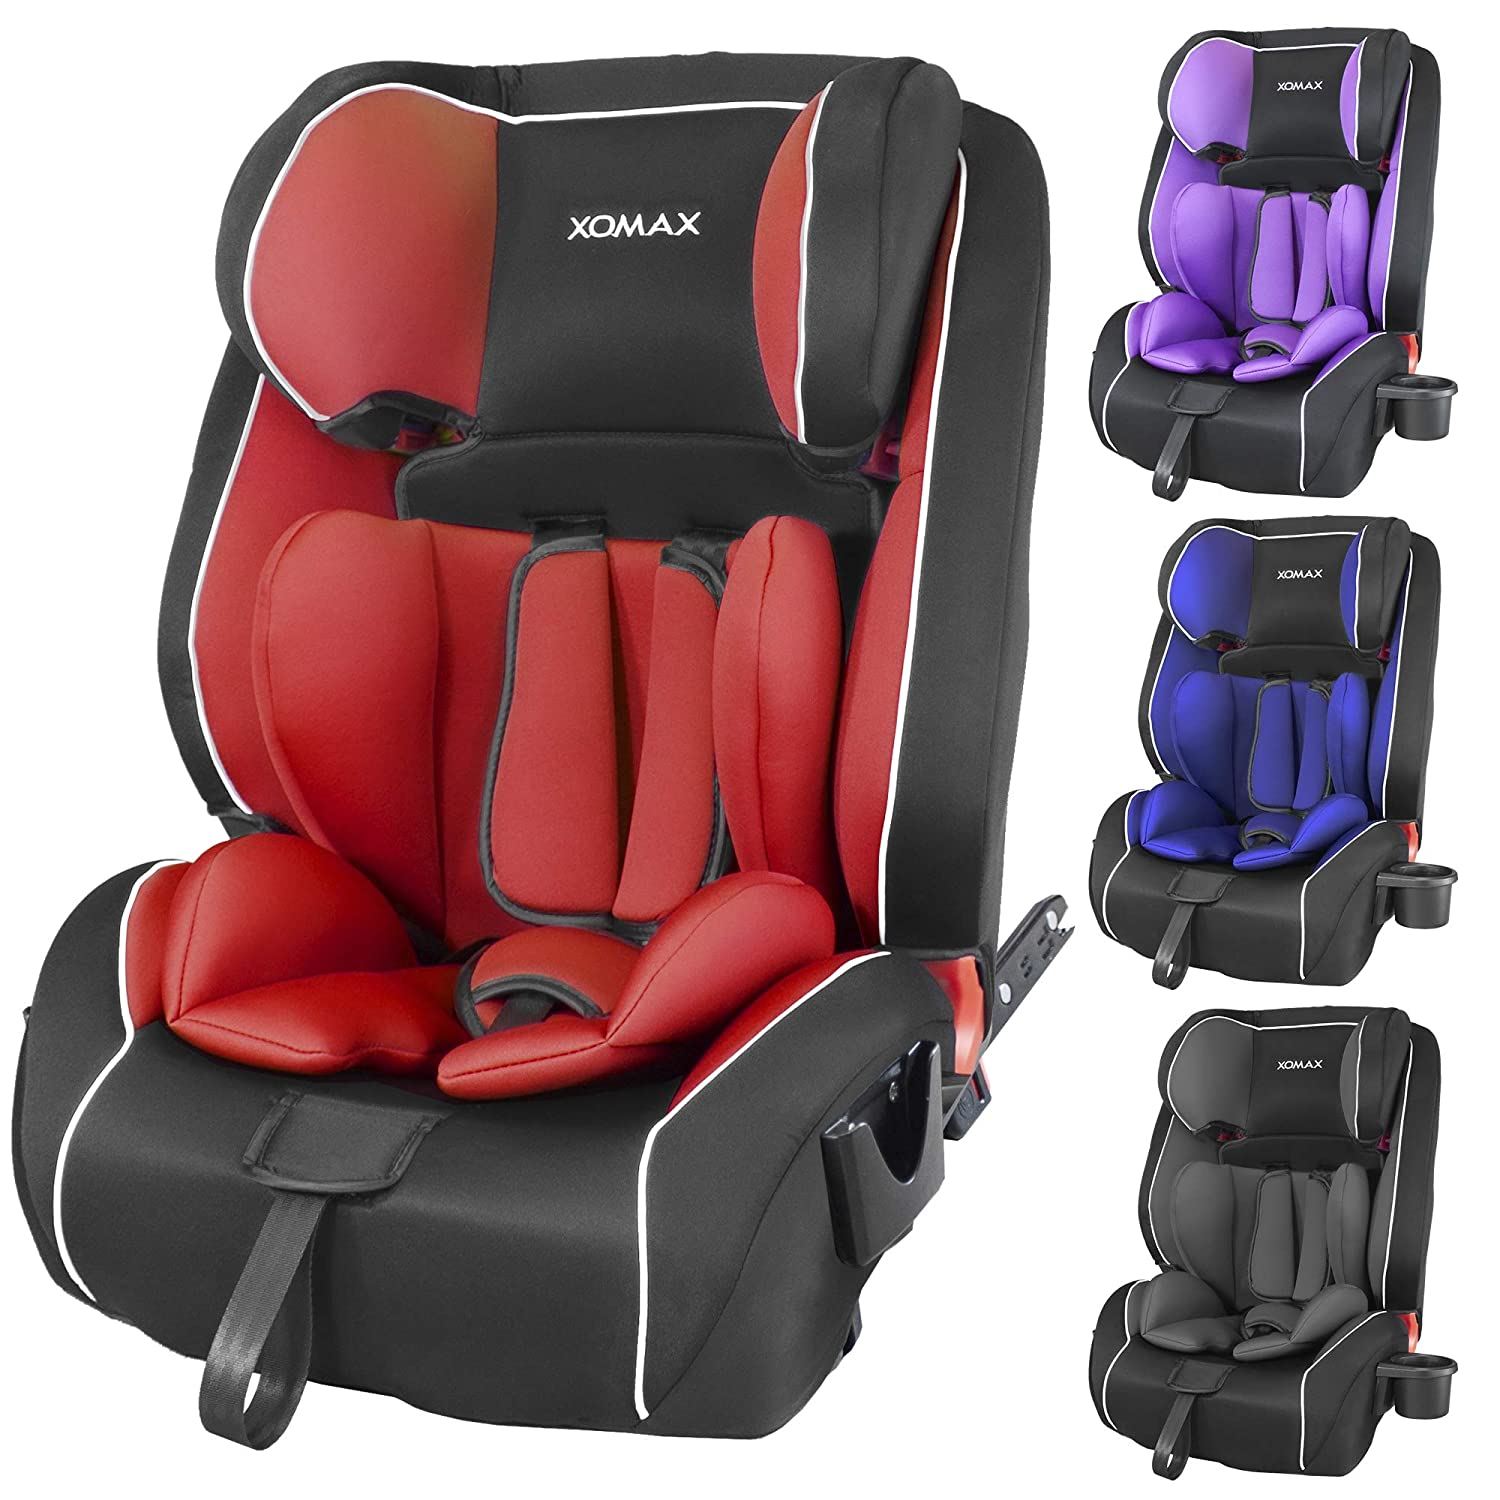 Xomax HQ668 Isofix Child Car Seat, 9 - 36 kg with Bottle Holder, Grows with Your Child: 1 - 12 Years, Group 1 / 2 / 3, 5-Point Harness and 3-Point Harness, Removable and Washable Cover, ECE R44/04 red